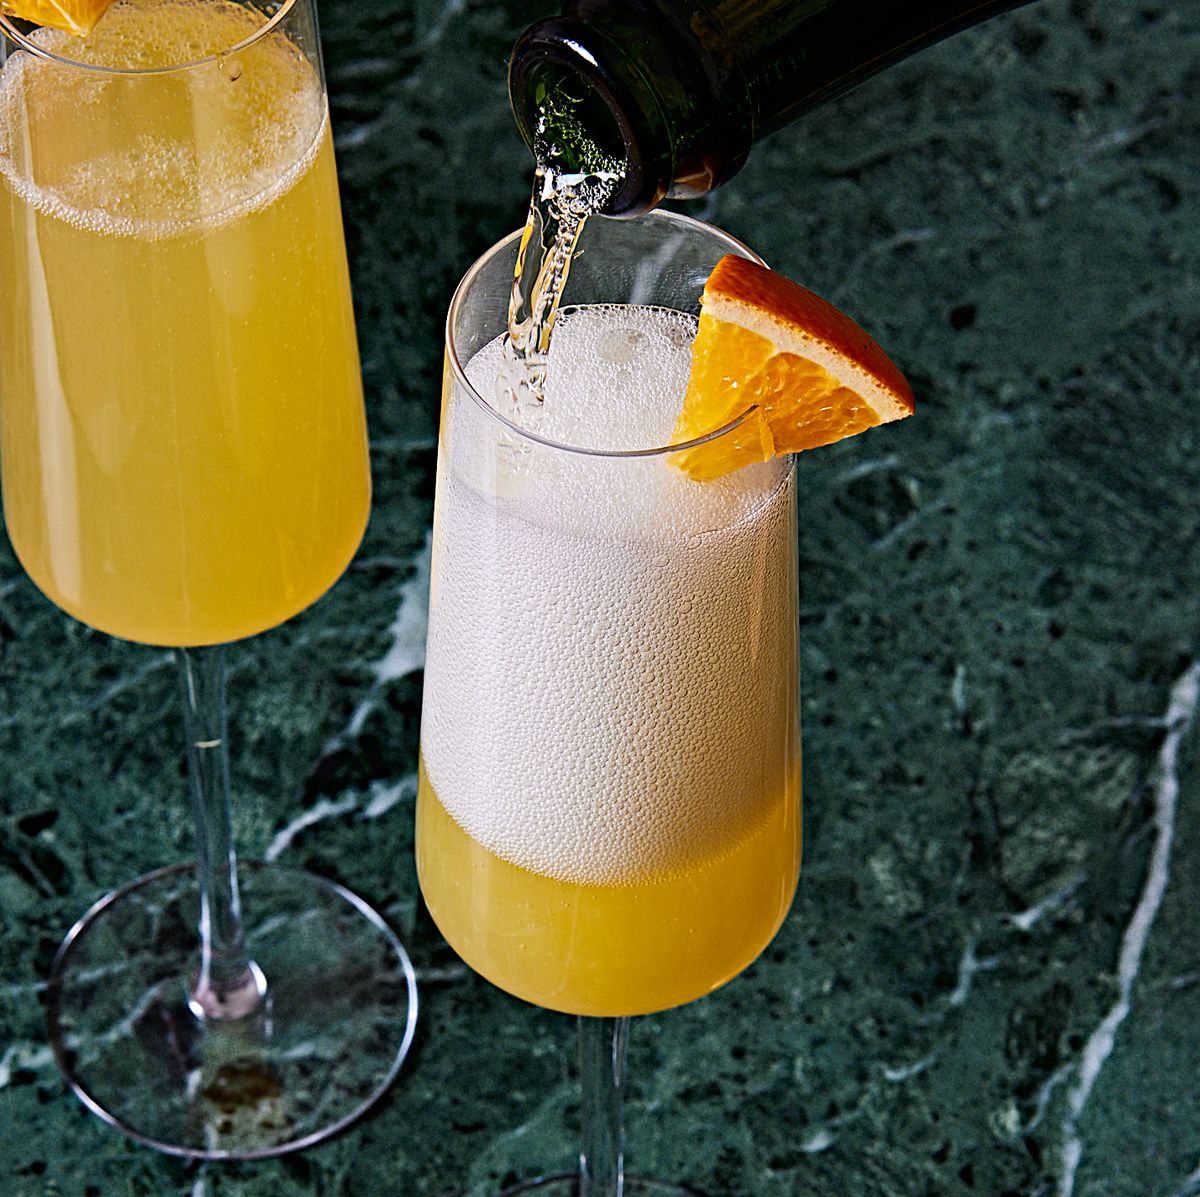 Classic Mimosa Recipe - How To Make An Easy Mimosa